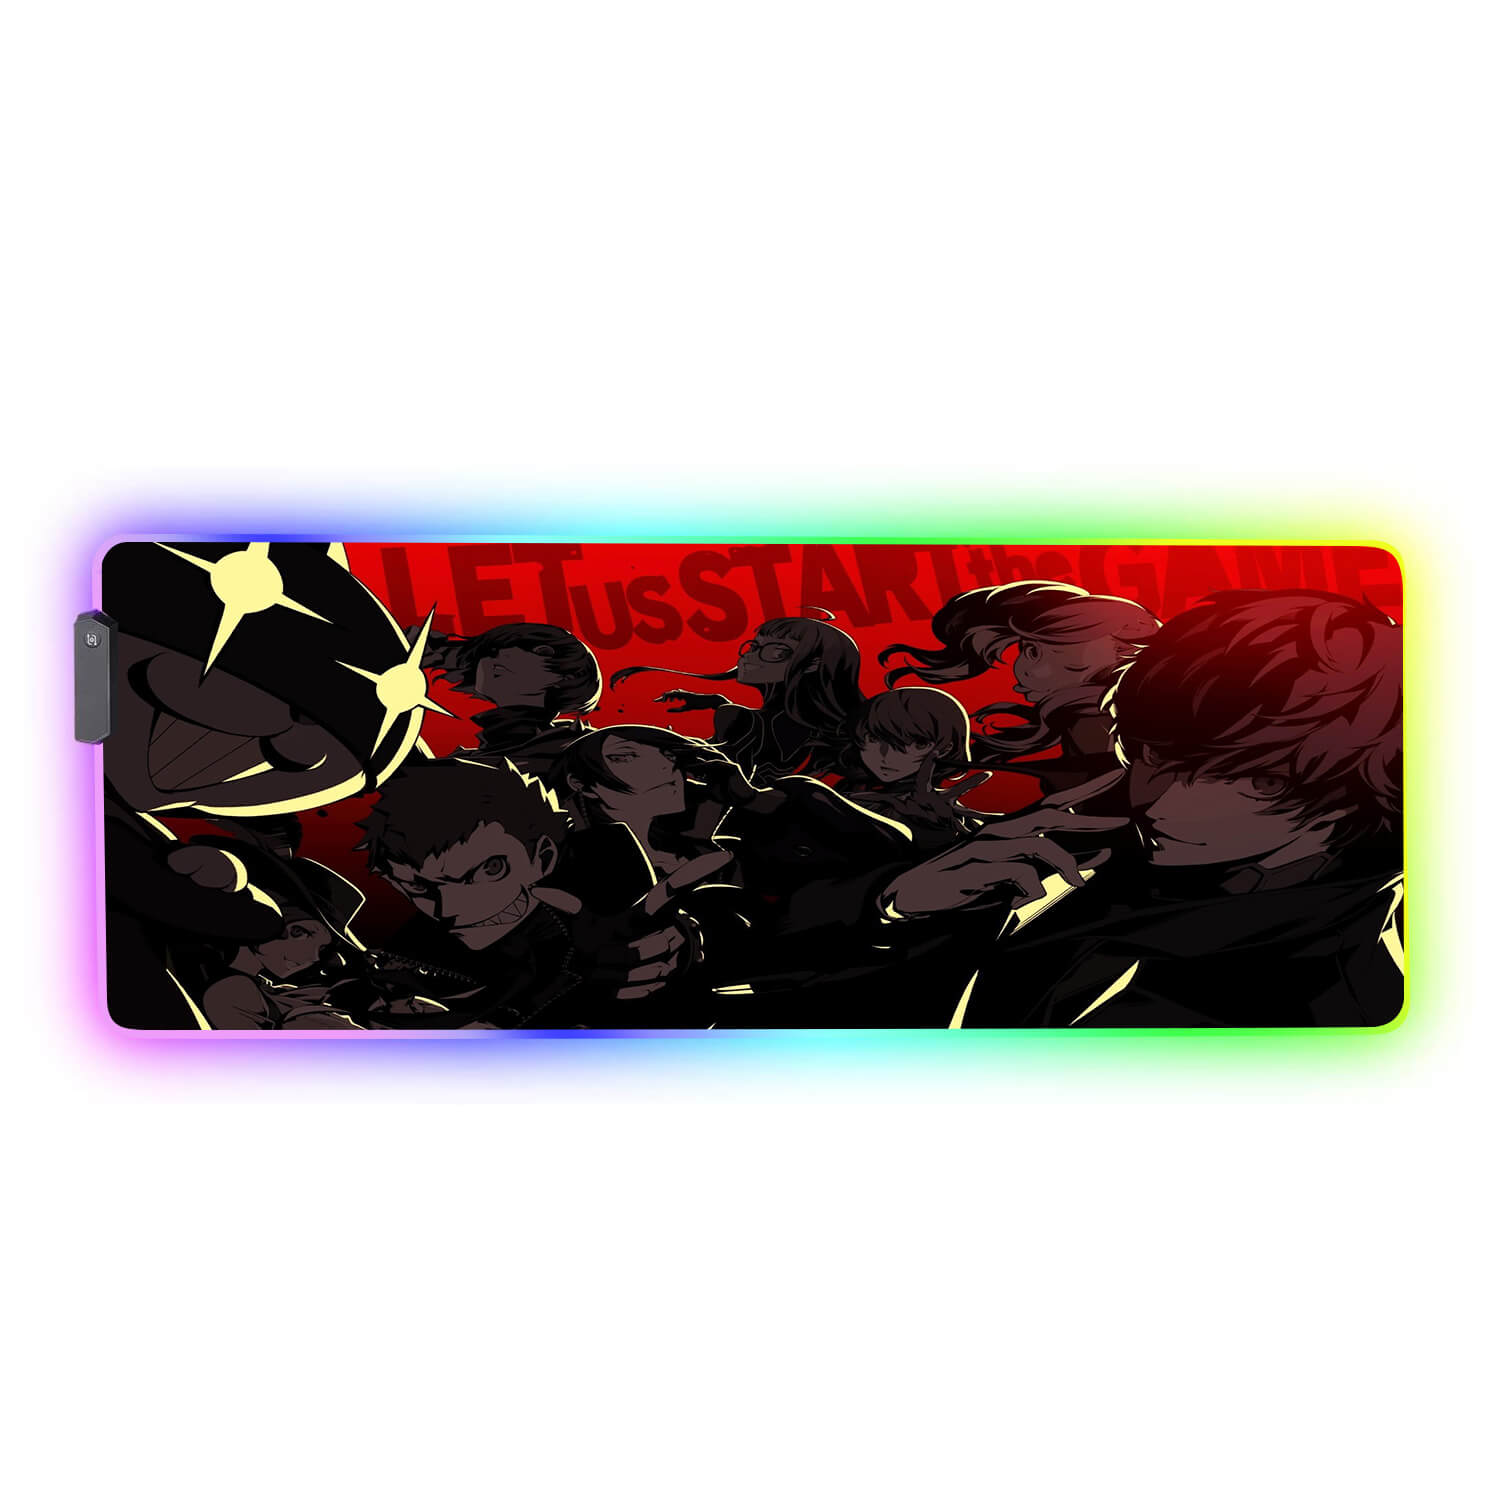 PERSONA 5 RGB Gaming Mouse Pad